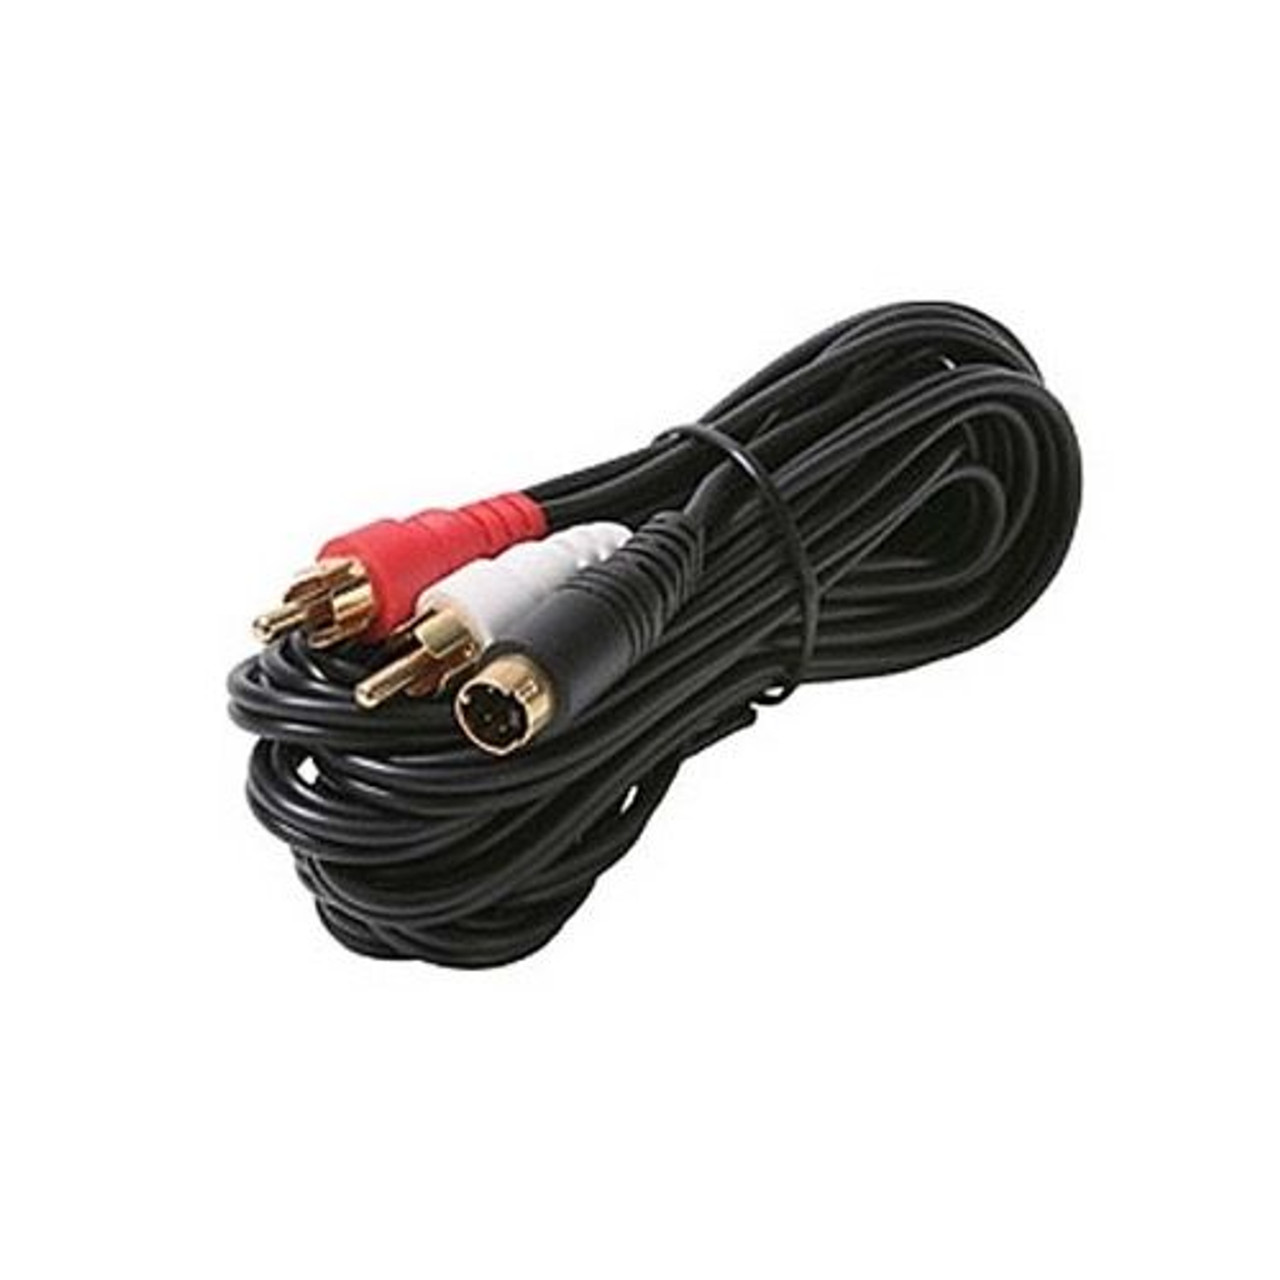 Eagle 12 FT S-Video 2 Male RCA Cable Stereo Gold Dual Audio Cable VHS Stereo Digital Audio Video Cable TV Connection Cord Premium Output Input Hook-Up Jacks